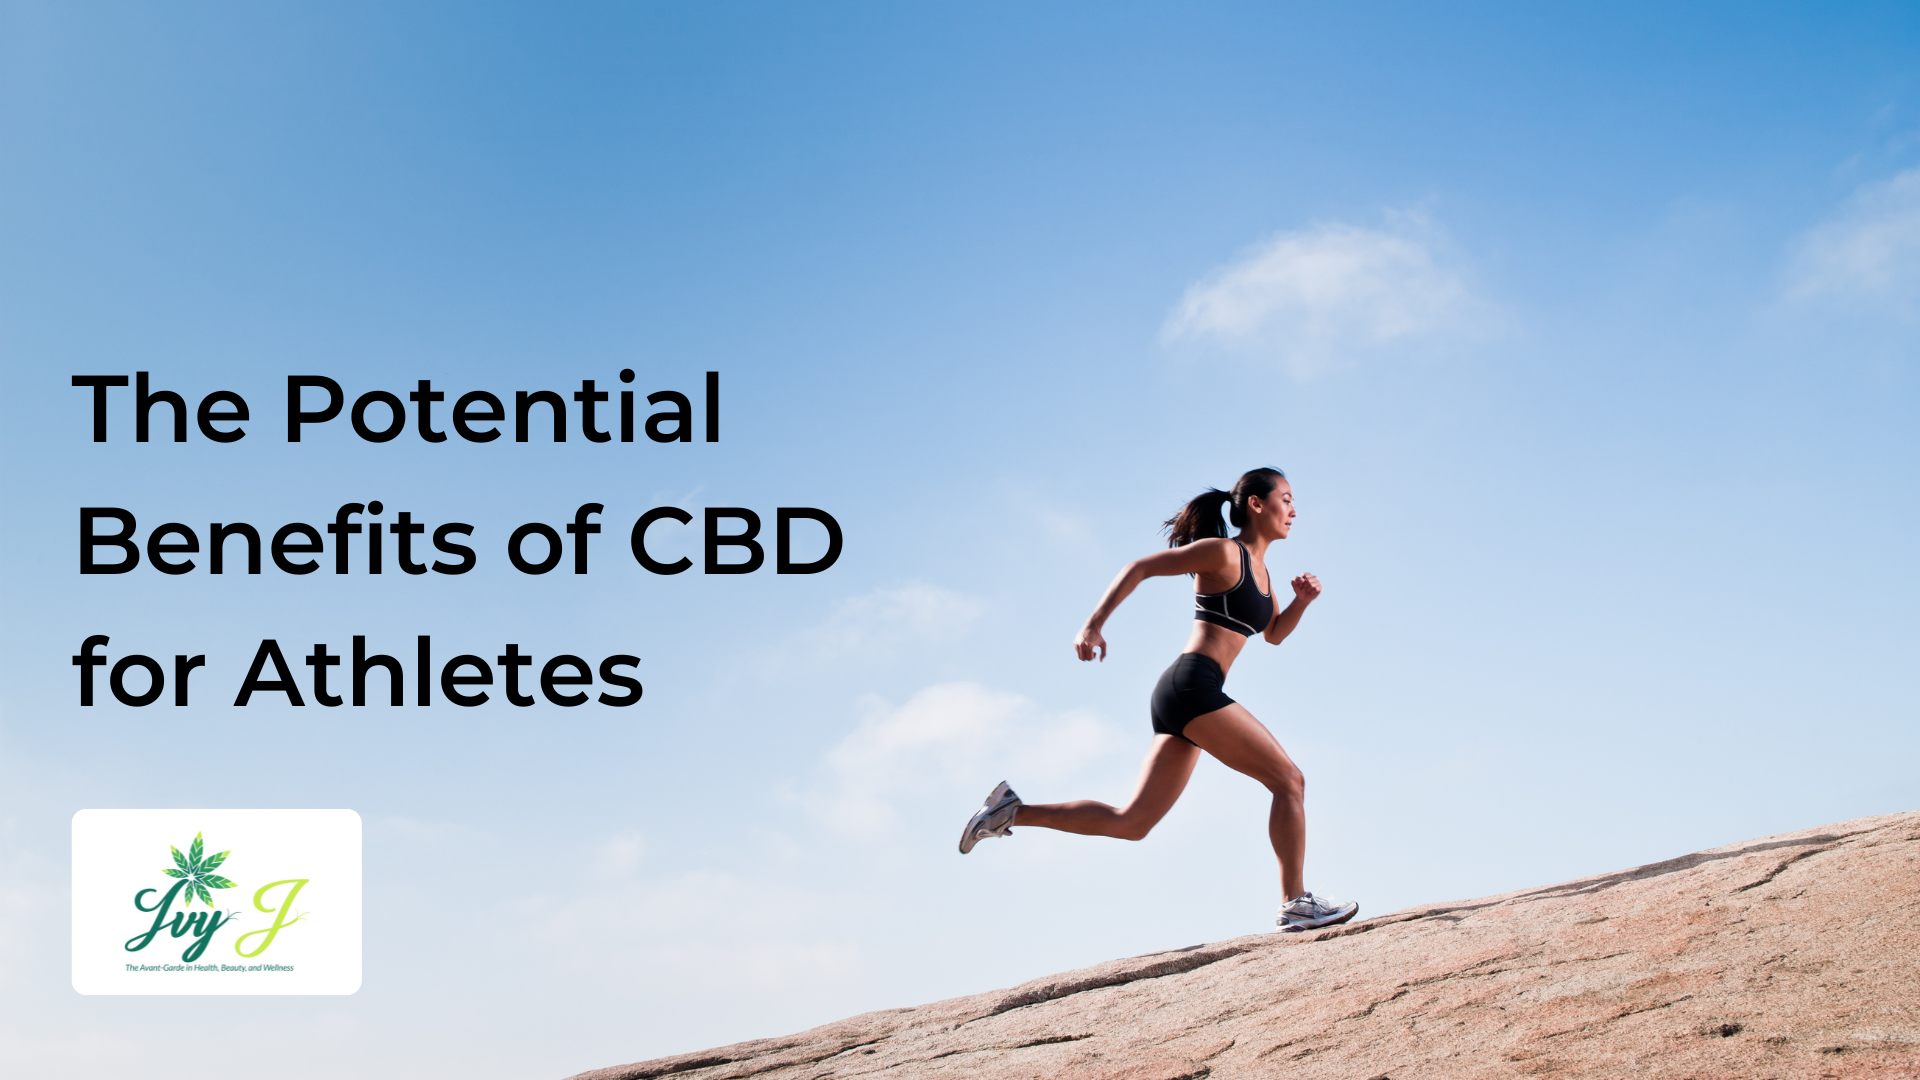 The Potential Benefits of CBD for Athletes